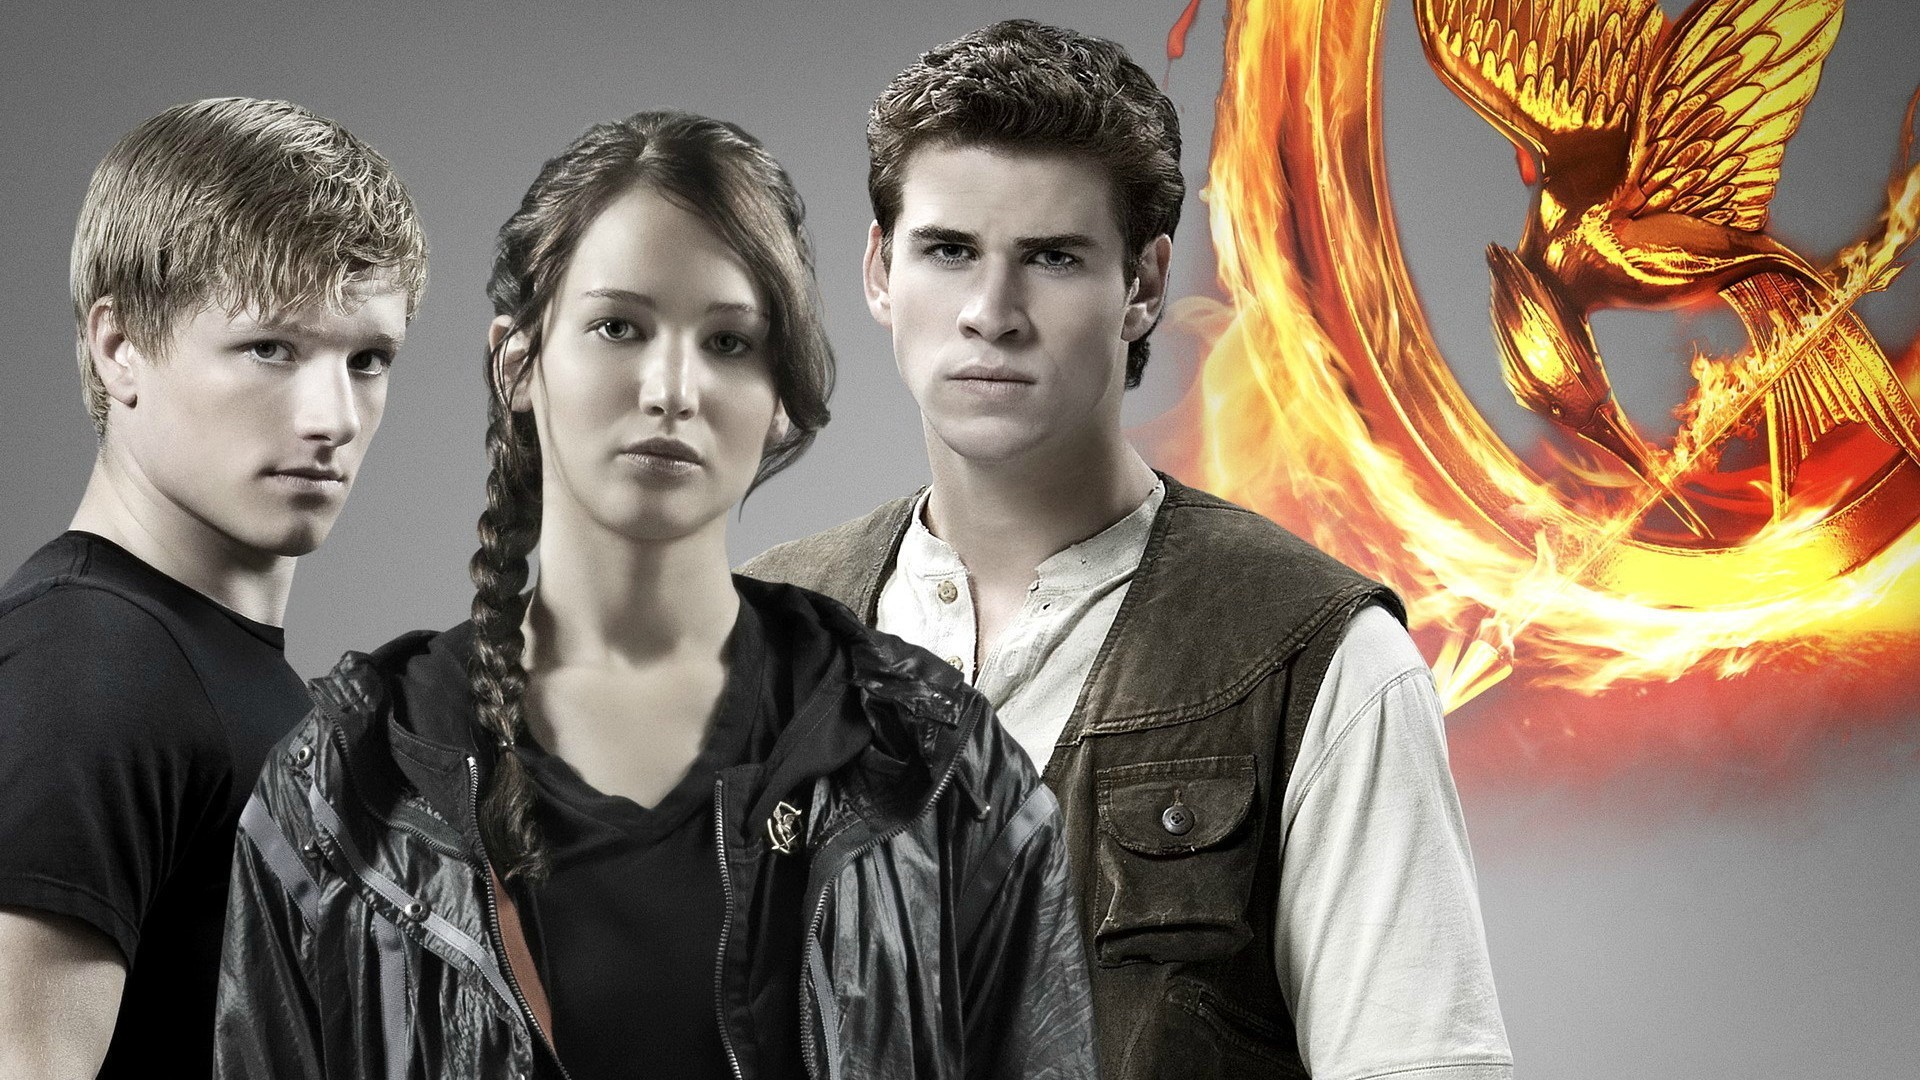 Movies The Hunger Games Jennifer Lawrence Liam Hemsworth 1920x1080